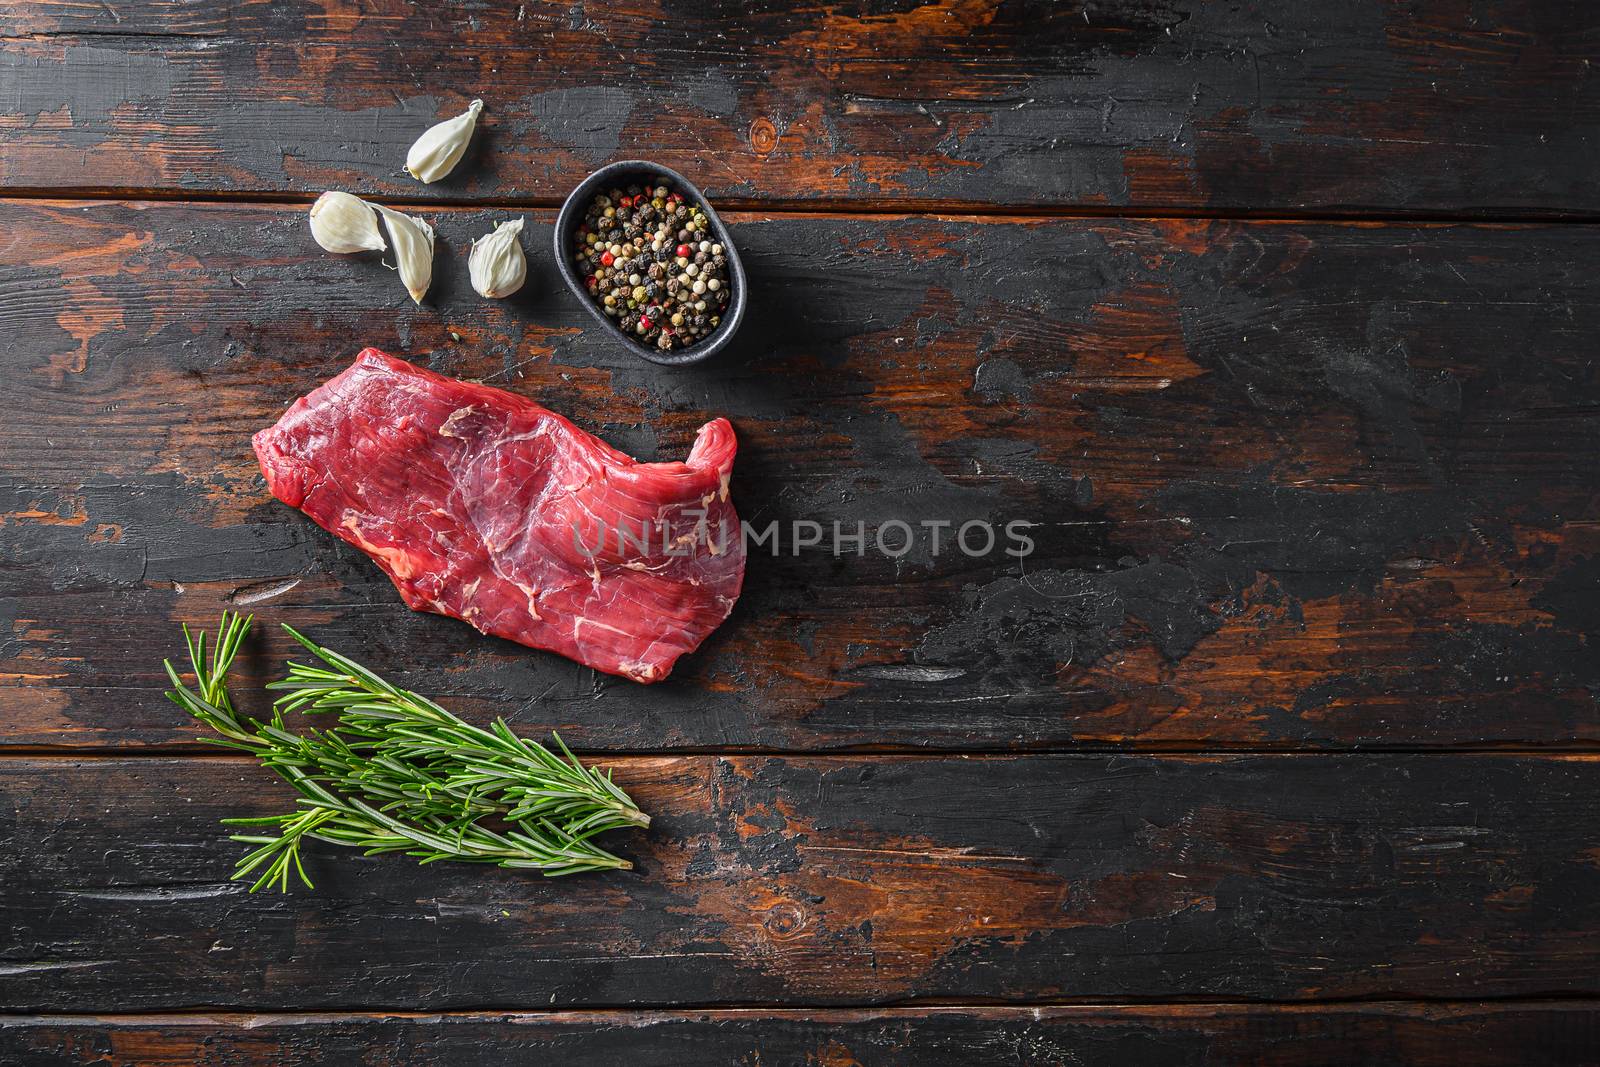 Flank, Bavette steak with seasonings, and fresh herbs raw meat, marbled beef . Dark wood rustic background. Top view space for text.